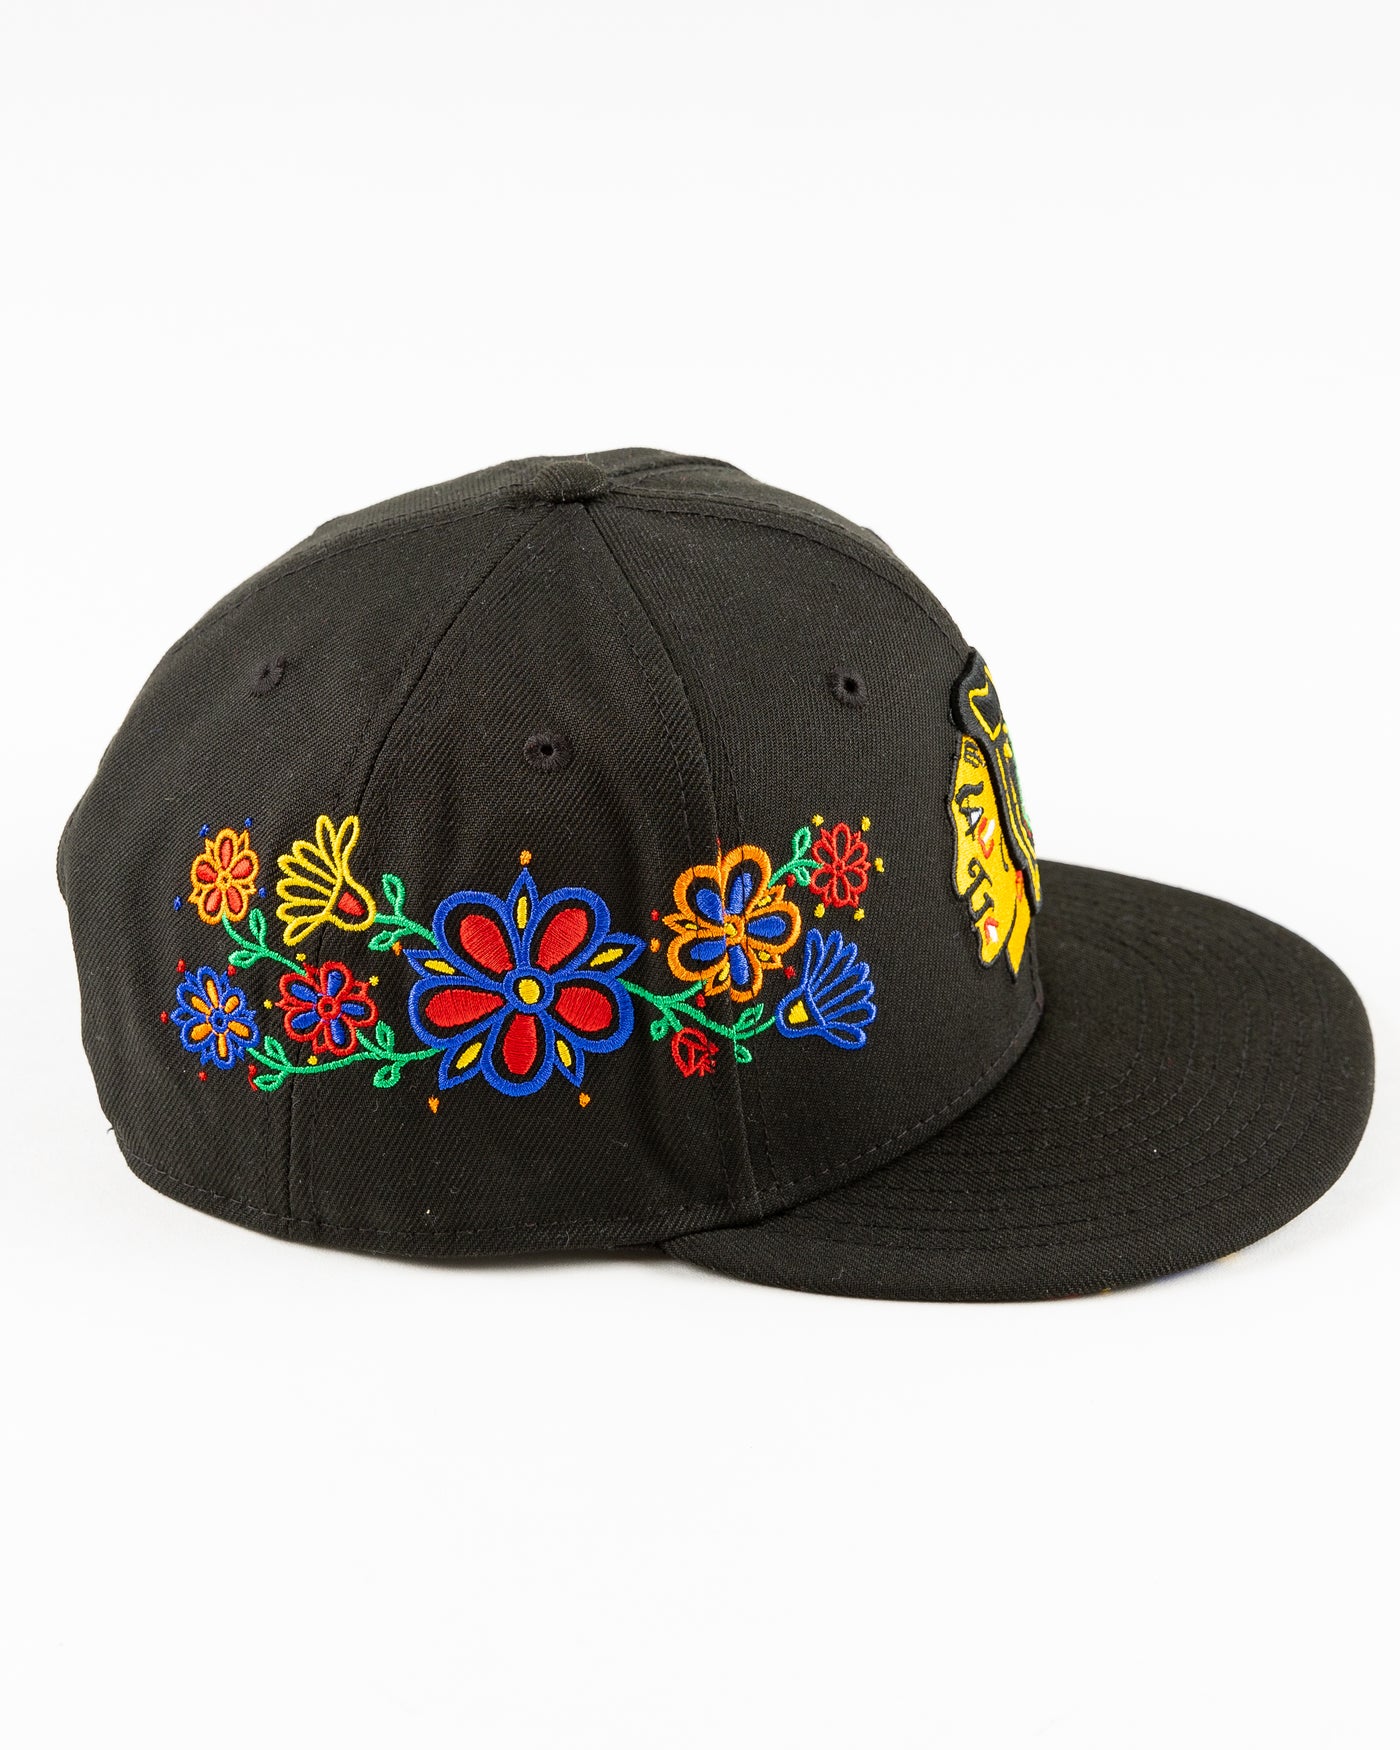 black New Era snapback with Chicago Blackhawks primary logo surrounded by floral pattern - right side lay flat